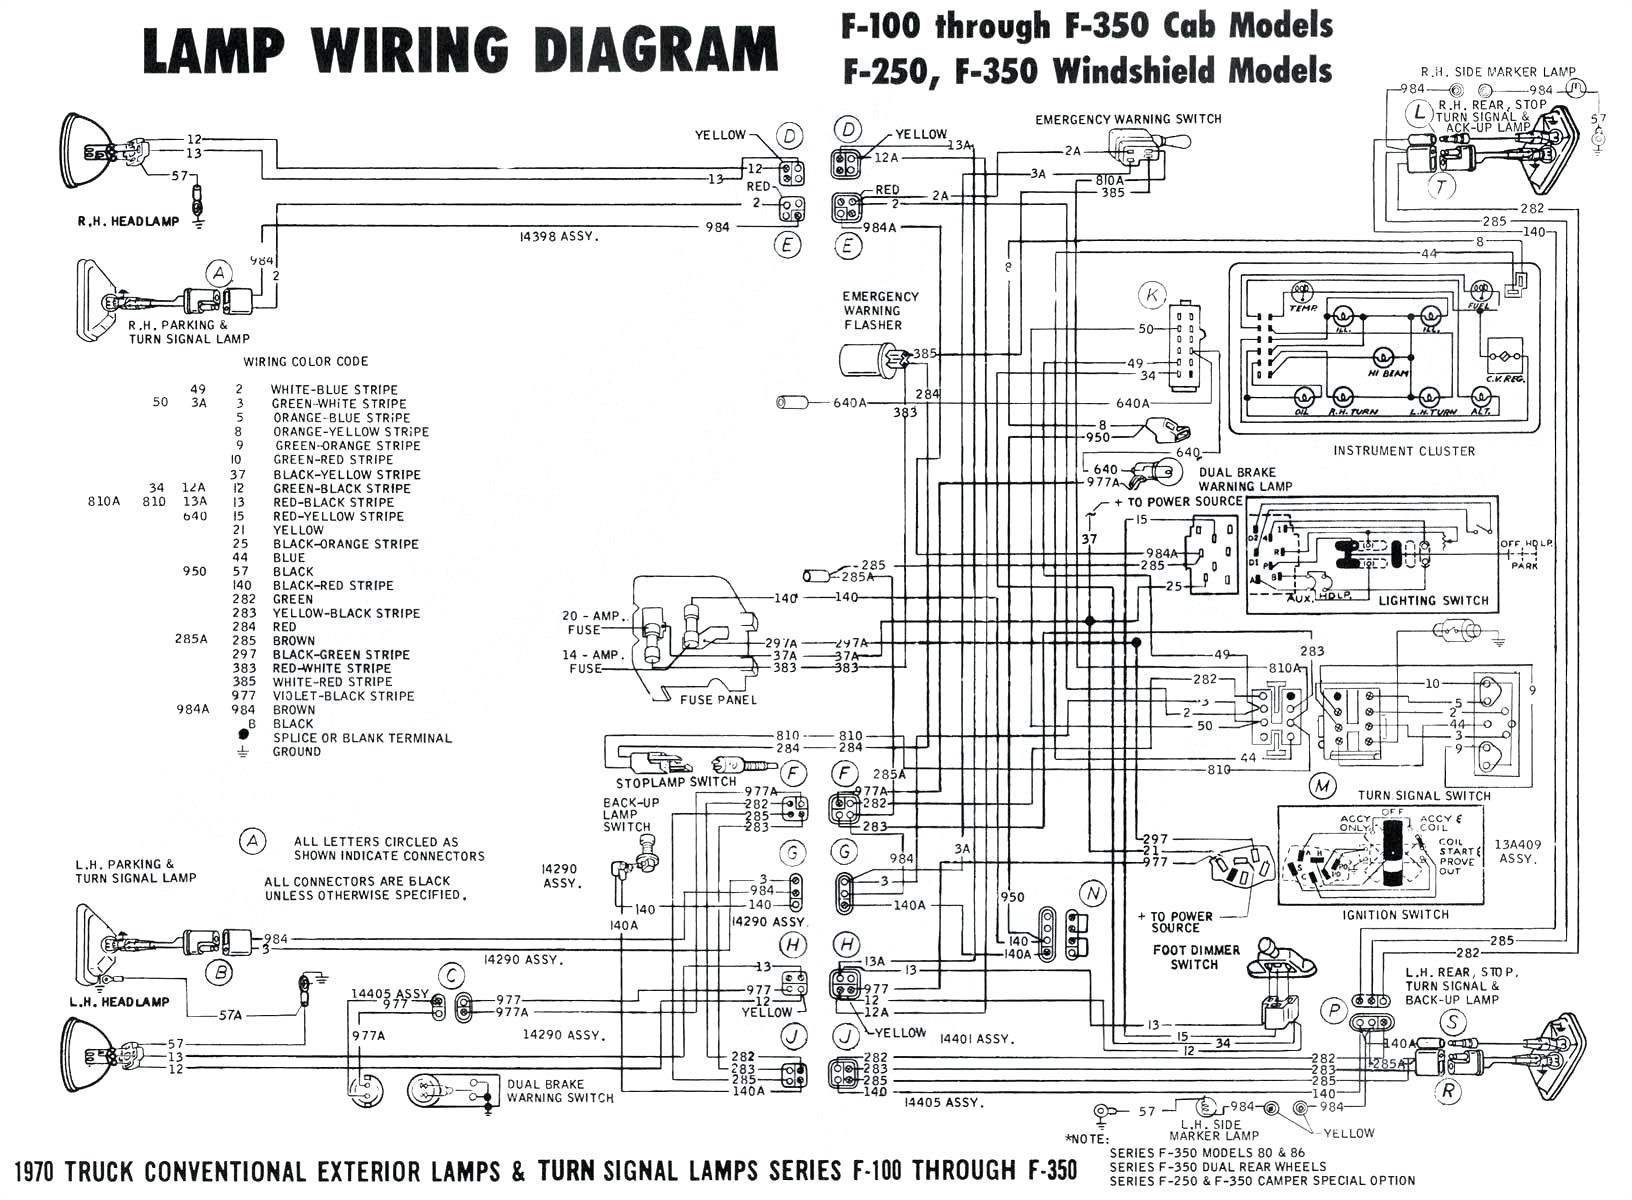 jeep zj wiring diagram bcm manual e book 1999 jeep grand cherokee wiring diagram download wiring